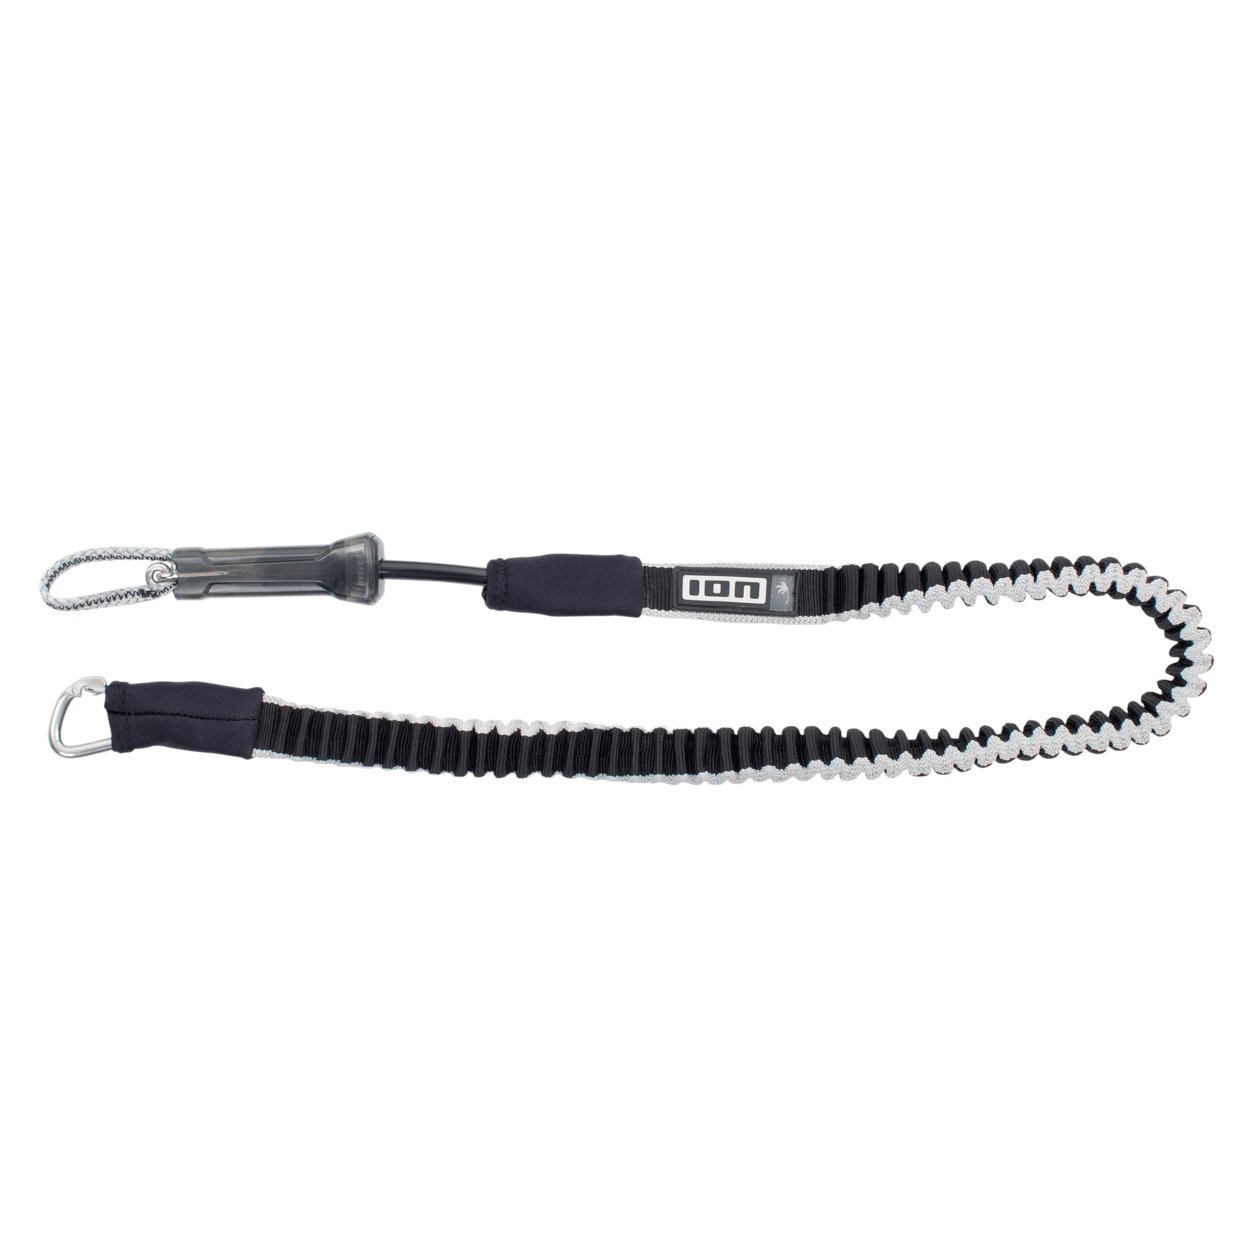 ION Handle Pass Leash Webbing 2022 - Worthing Watersports - 9008415960422 - Accessories - ION Water